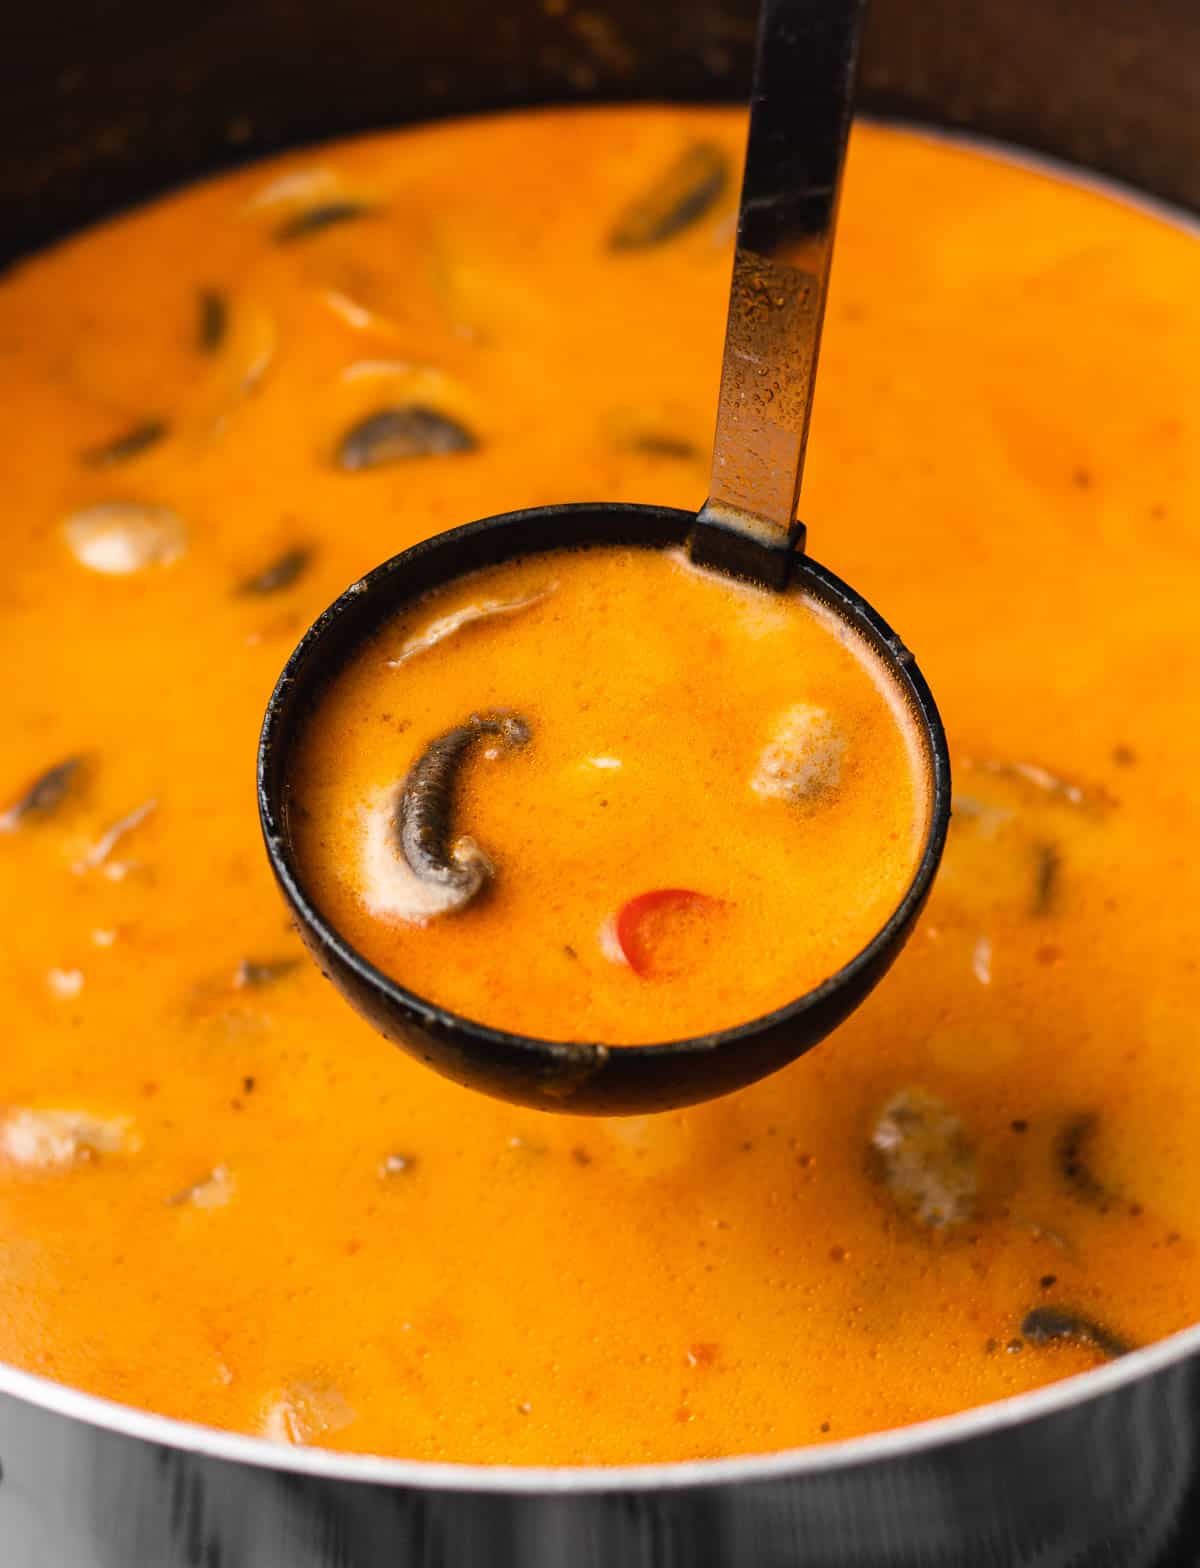 A ladle serving creamy tomato soup with vegetables from a pot.